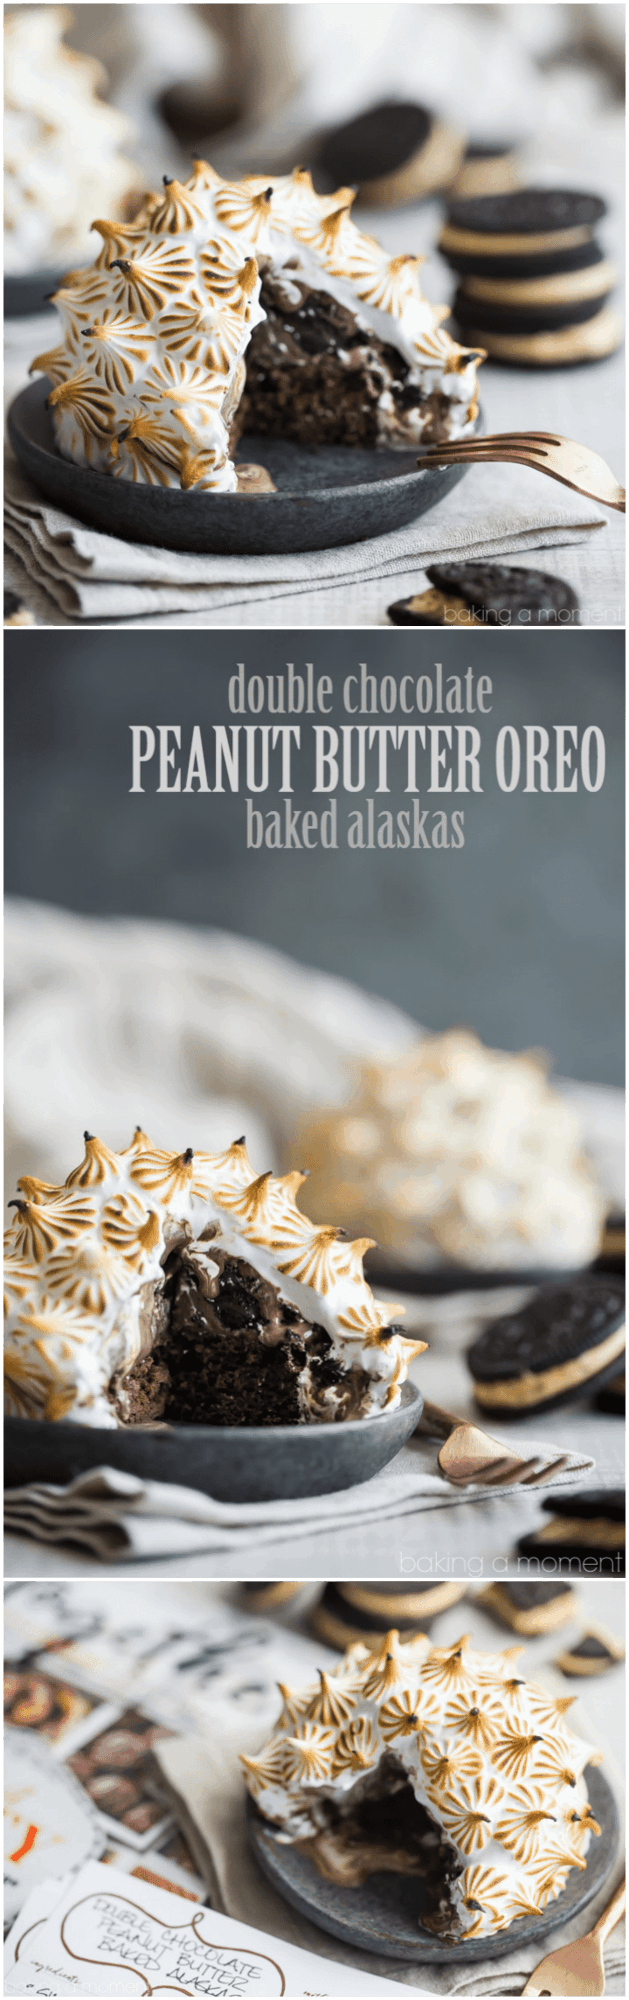 Double Chocolate Peanut Butter Oreo Baked Alaskas- WHOA! So many incredible flavors and textures going on here. Perfect for when you really want to impress. #BHGParty